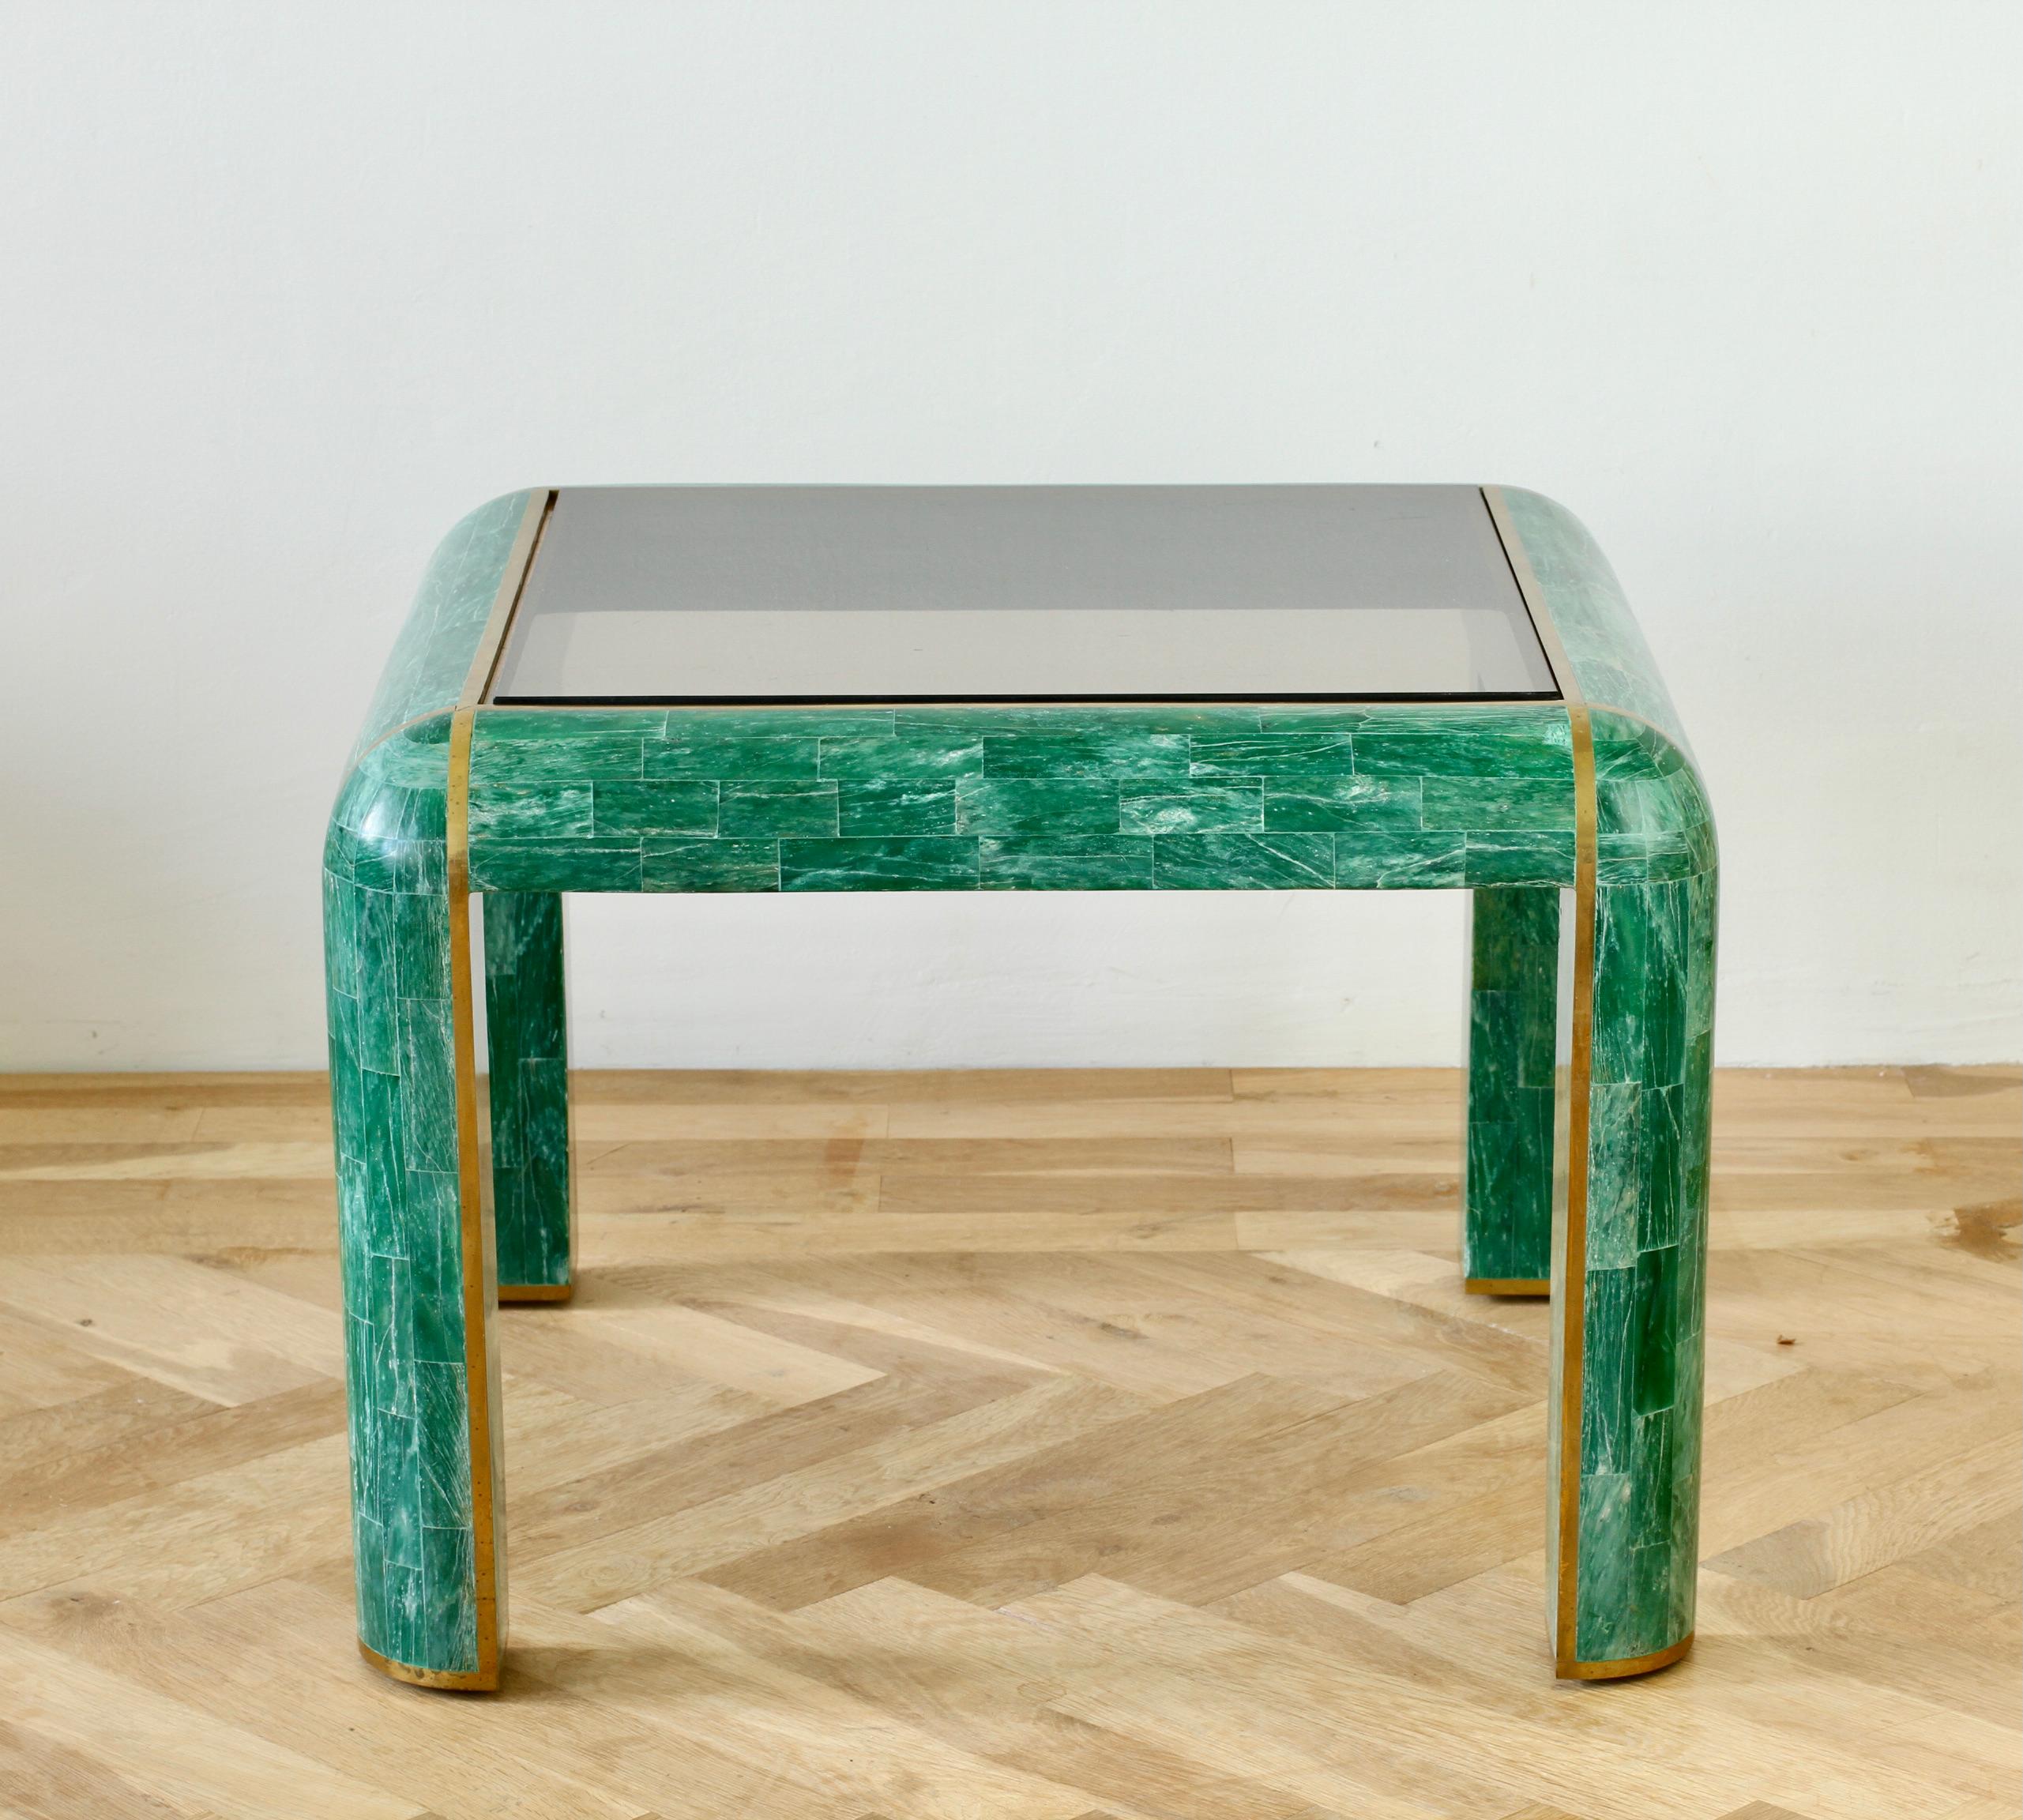 Philippine Mid-Century Green Tessellated Stone and Brass Side Table by Casa Bique, c. 1970s